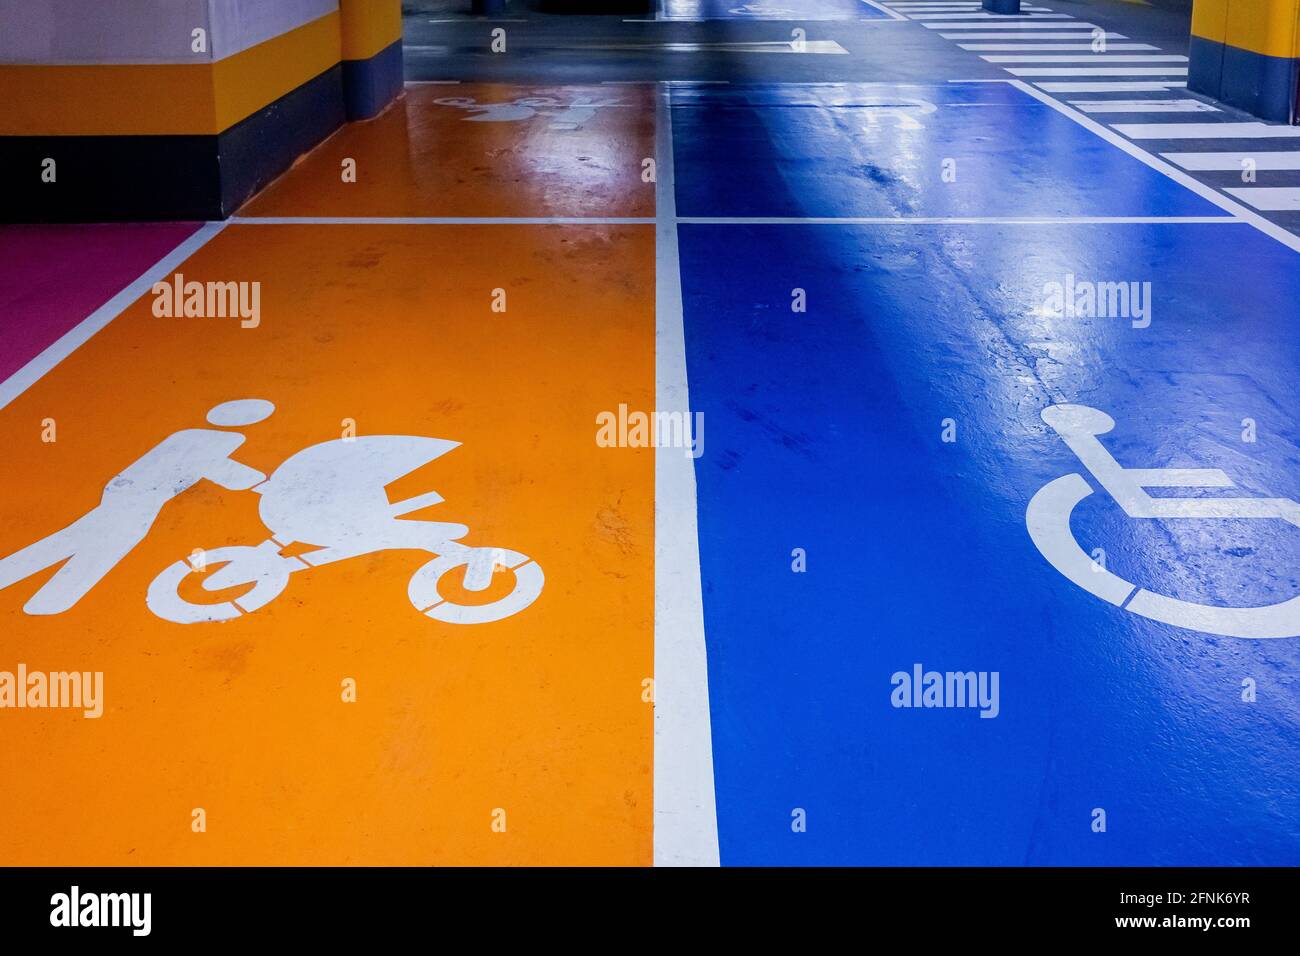 Parking spaces reserved for families and the disabled in a covered car park. Stock Photo